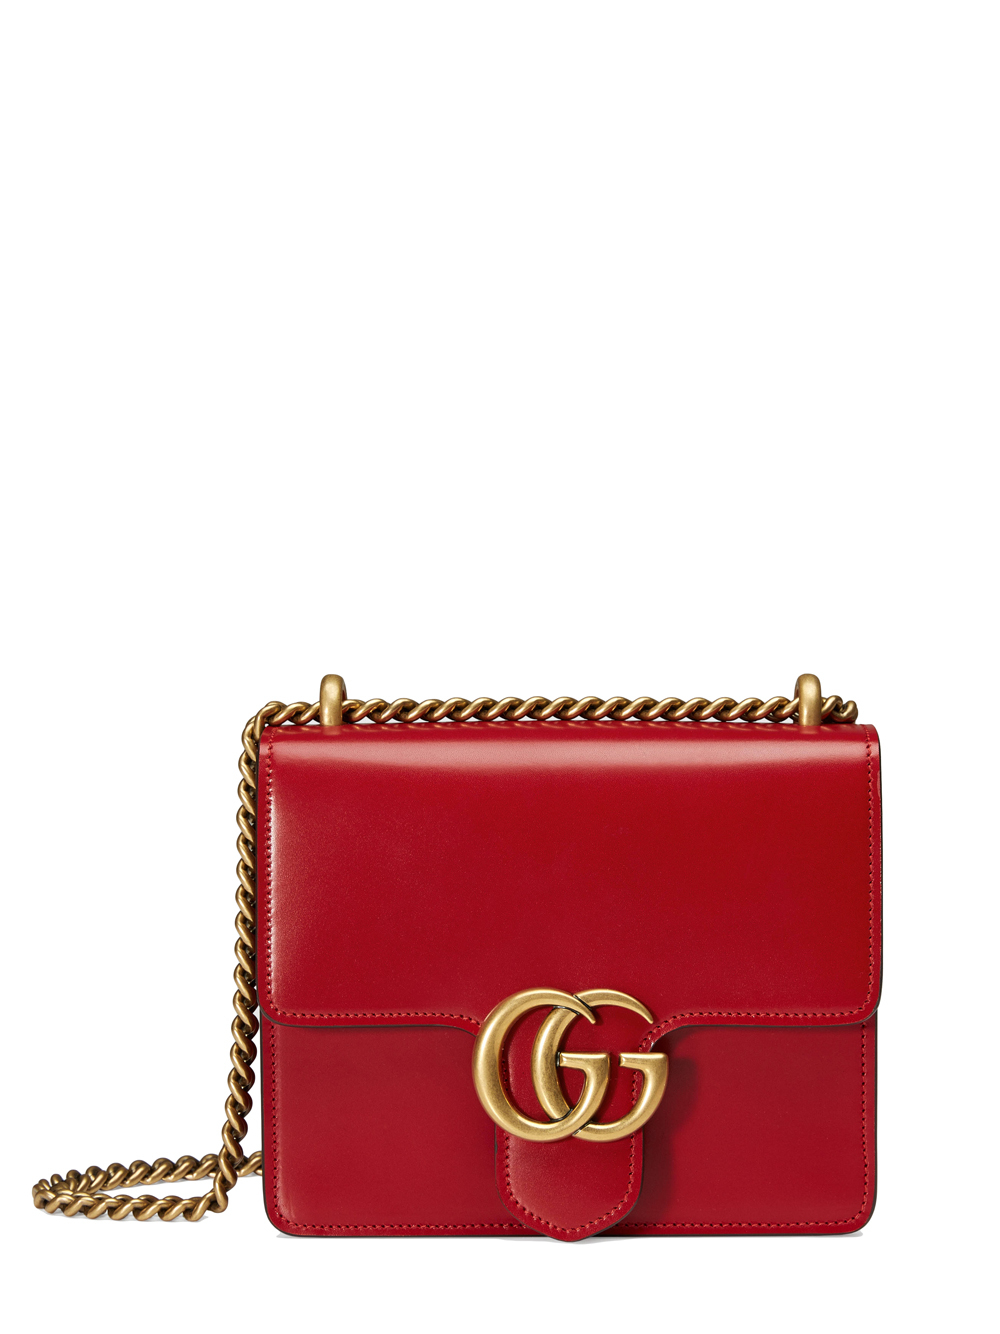 Lyst Gucci  Small Marmont  Bag  Red  in Red 